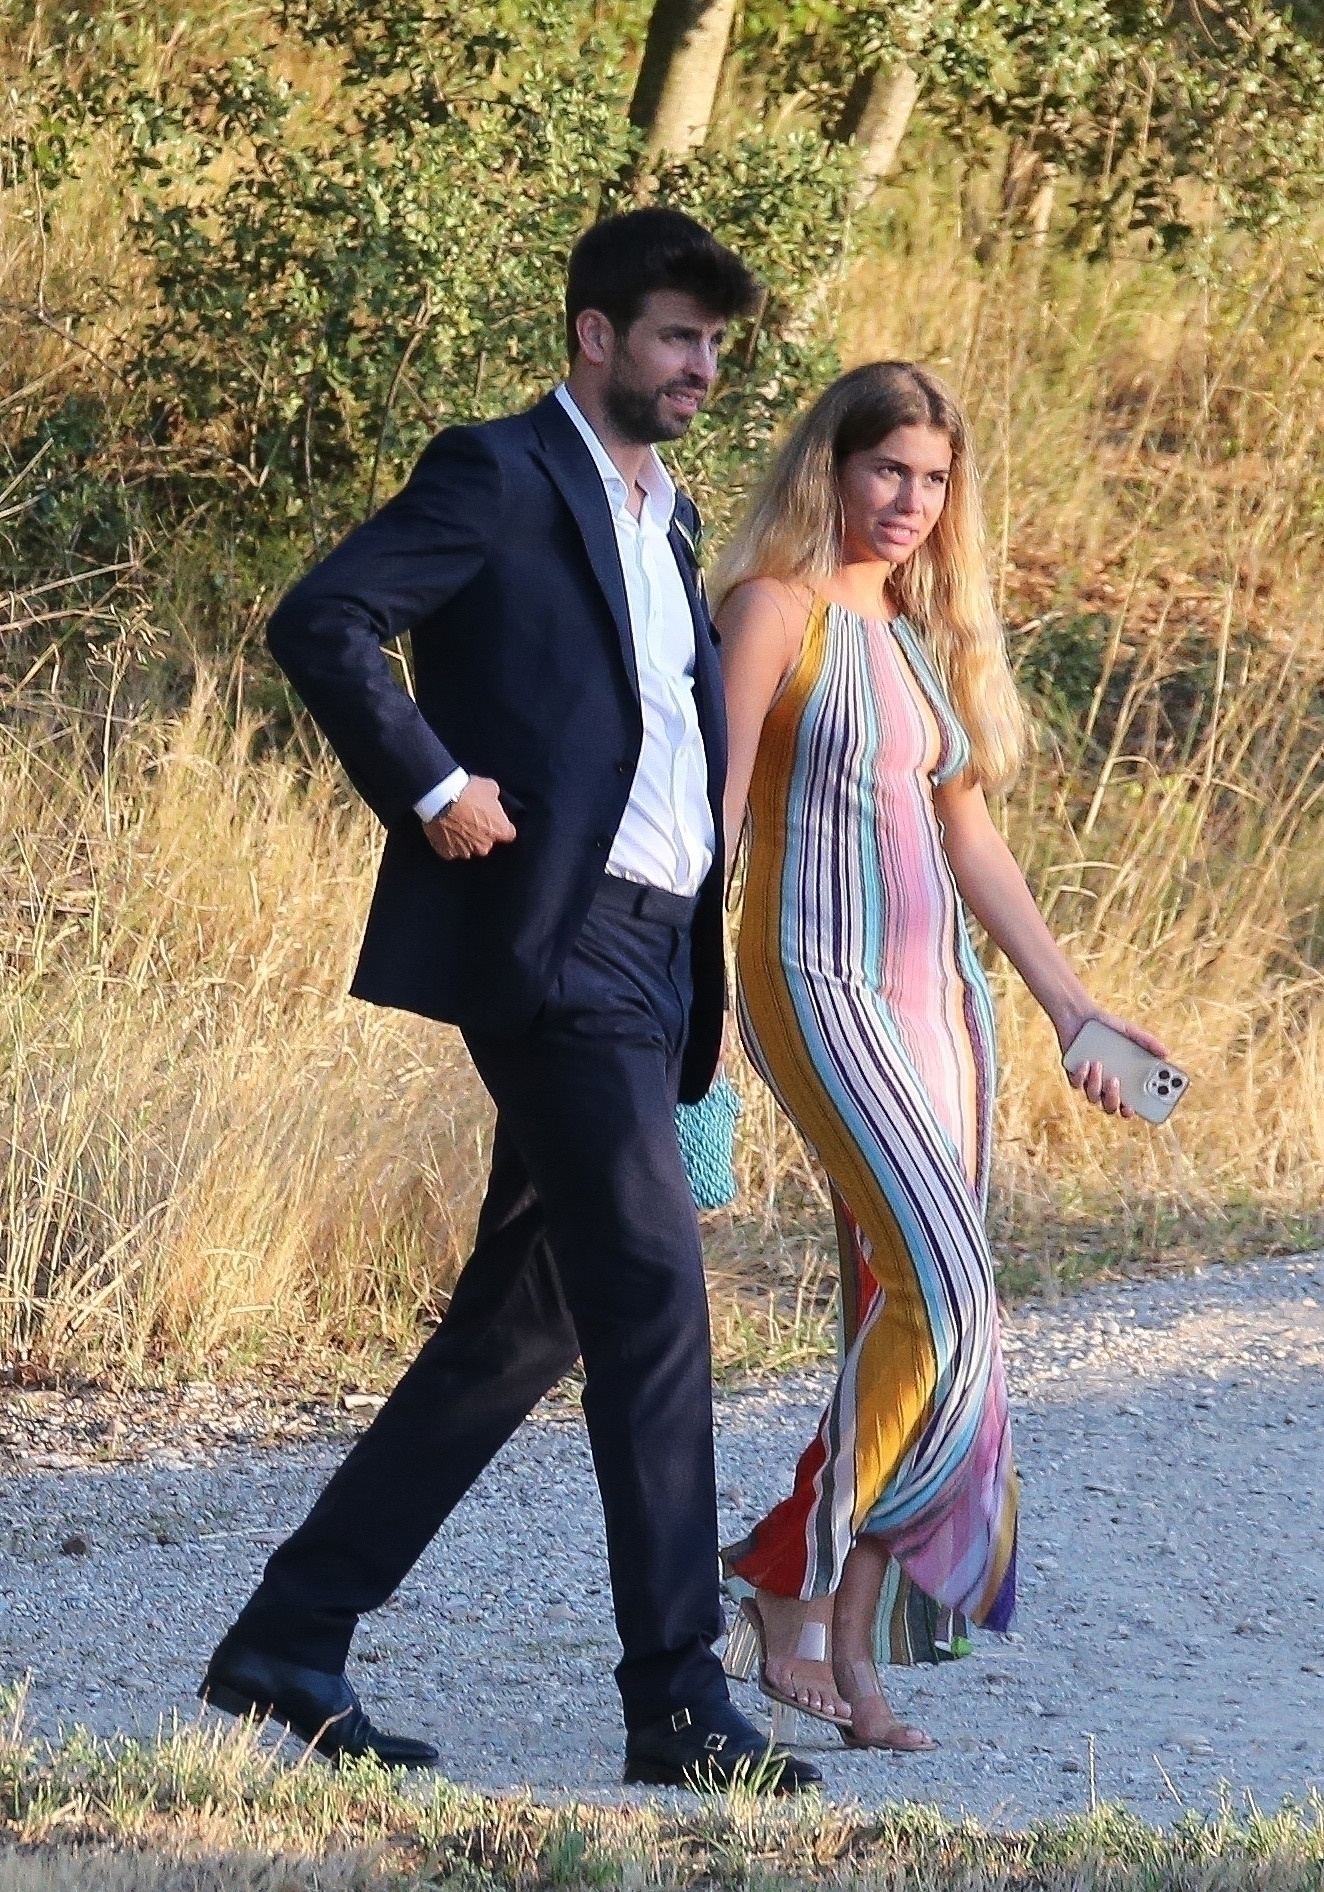 <p>Colombian music superstar Shakira and Spanish football player Gerard Pique's <a href="https://www.wonderwall.com/news/shakira-breaks-social-media-silence-after-splitting-with-ex-amid-cheating-rumors-608750.article">split</a> after more than a decade as a couple made headlines in June 2022 amid claims the athlete -- who at 35 is 10 years the singer's junior -- <a href="https://www.wonderwall.com/celebrity/couples/celebrity-cheating-scandals-of-2022-621309.gallery?photoId=1029464">was unfaithful</a>. Gerard soon went public with a new love: Clara Chia (pictured), a public relations student who works in the special events department at his movie and TV production company, Kosmos, <a href="https://www.thesun.co.uk/tvandshowbiz/19474796/gerard-pique-dating-student-shakira/" rel="noreferrer noopener">The Sun</a> reported in August 2022. Clara was reportedly 23 at the time, making her 12 years younger than Gerard -- and half Shakira's age. </p>